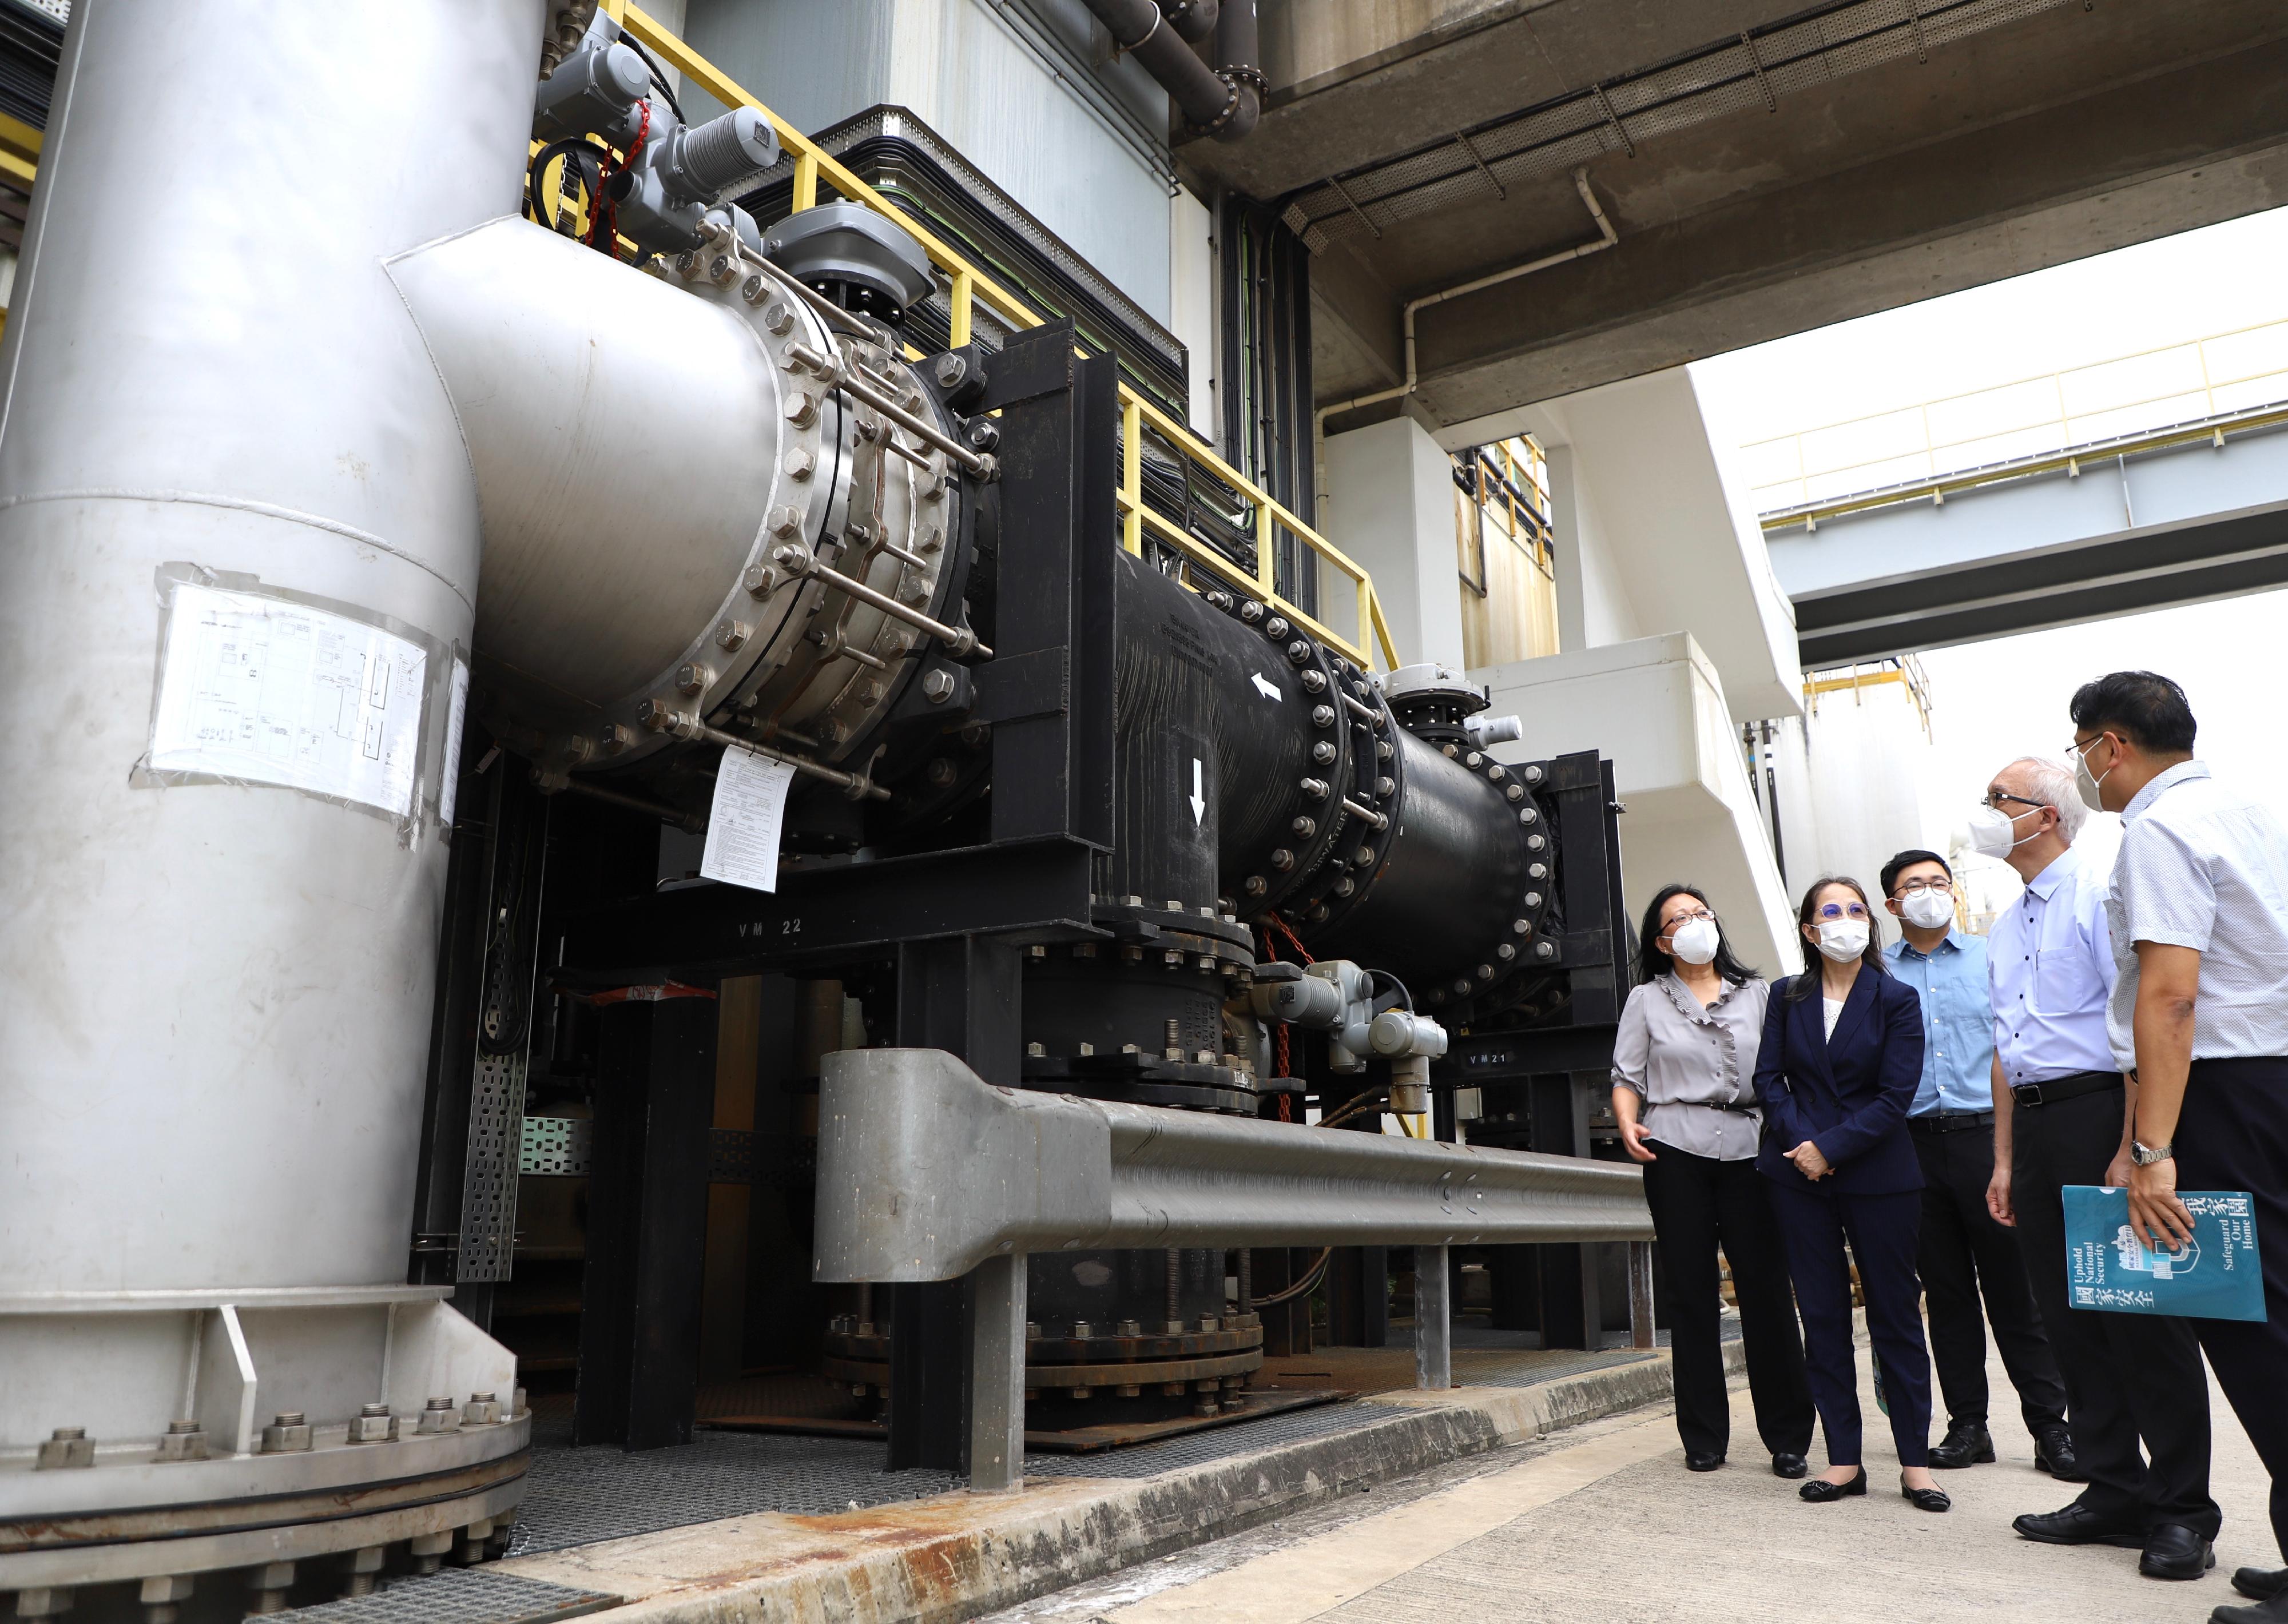 The Secretary for Environment and Ecology, Mr Tse Chin-wan, and the Under Secretary for Environment and Ecology, Miss Diane Wong, today (September 7) visited the Stonecutters Island Sewage Treatment Works of the Drainage Services Department to learn more about the work of the department. Photo shows Mr Tse (second right) and Miss Wong (second left), accompanied by the Director of Drainage Services, Ms Alice Pang (first left), inspecting the hydro-turbine power generation system at the treatment works to understand how electricity is generated from sewage flow for the use by the treatment works.